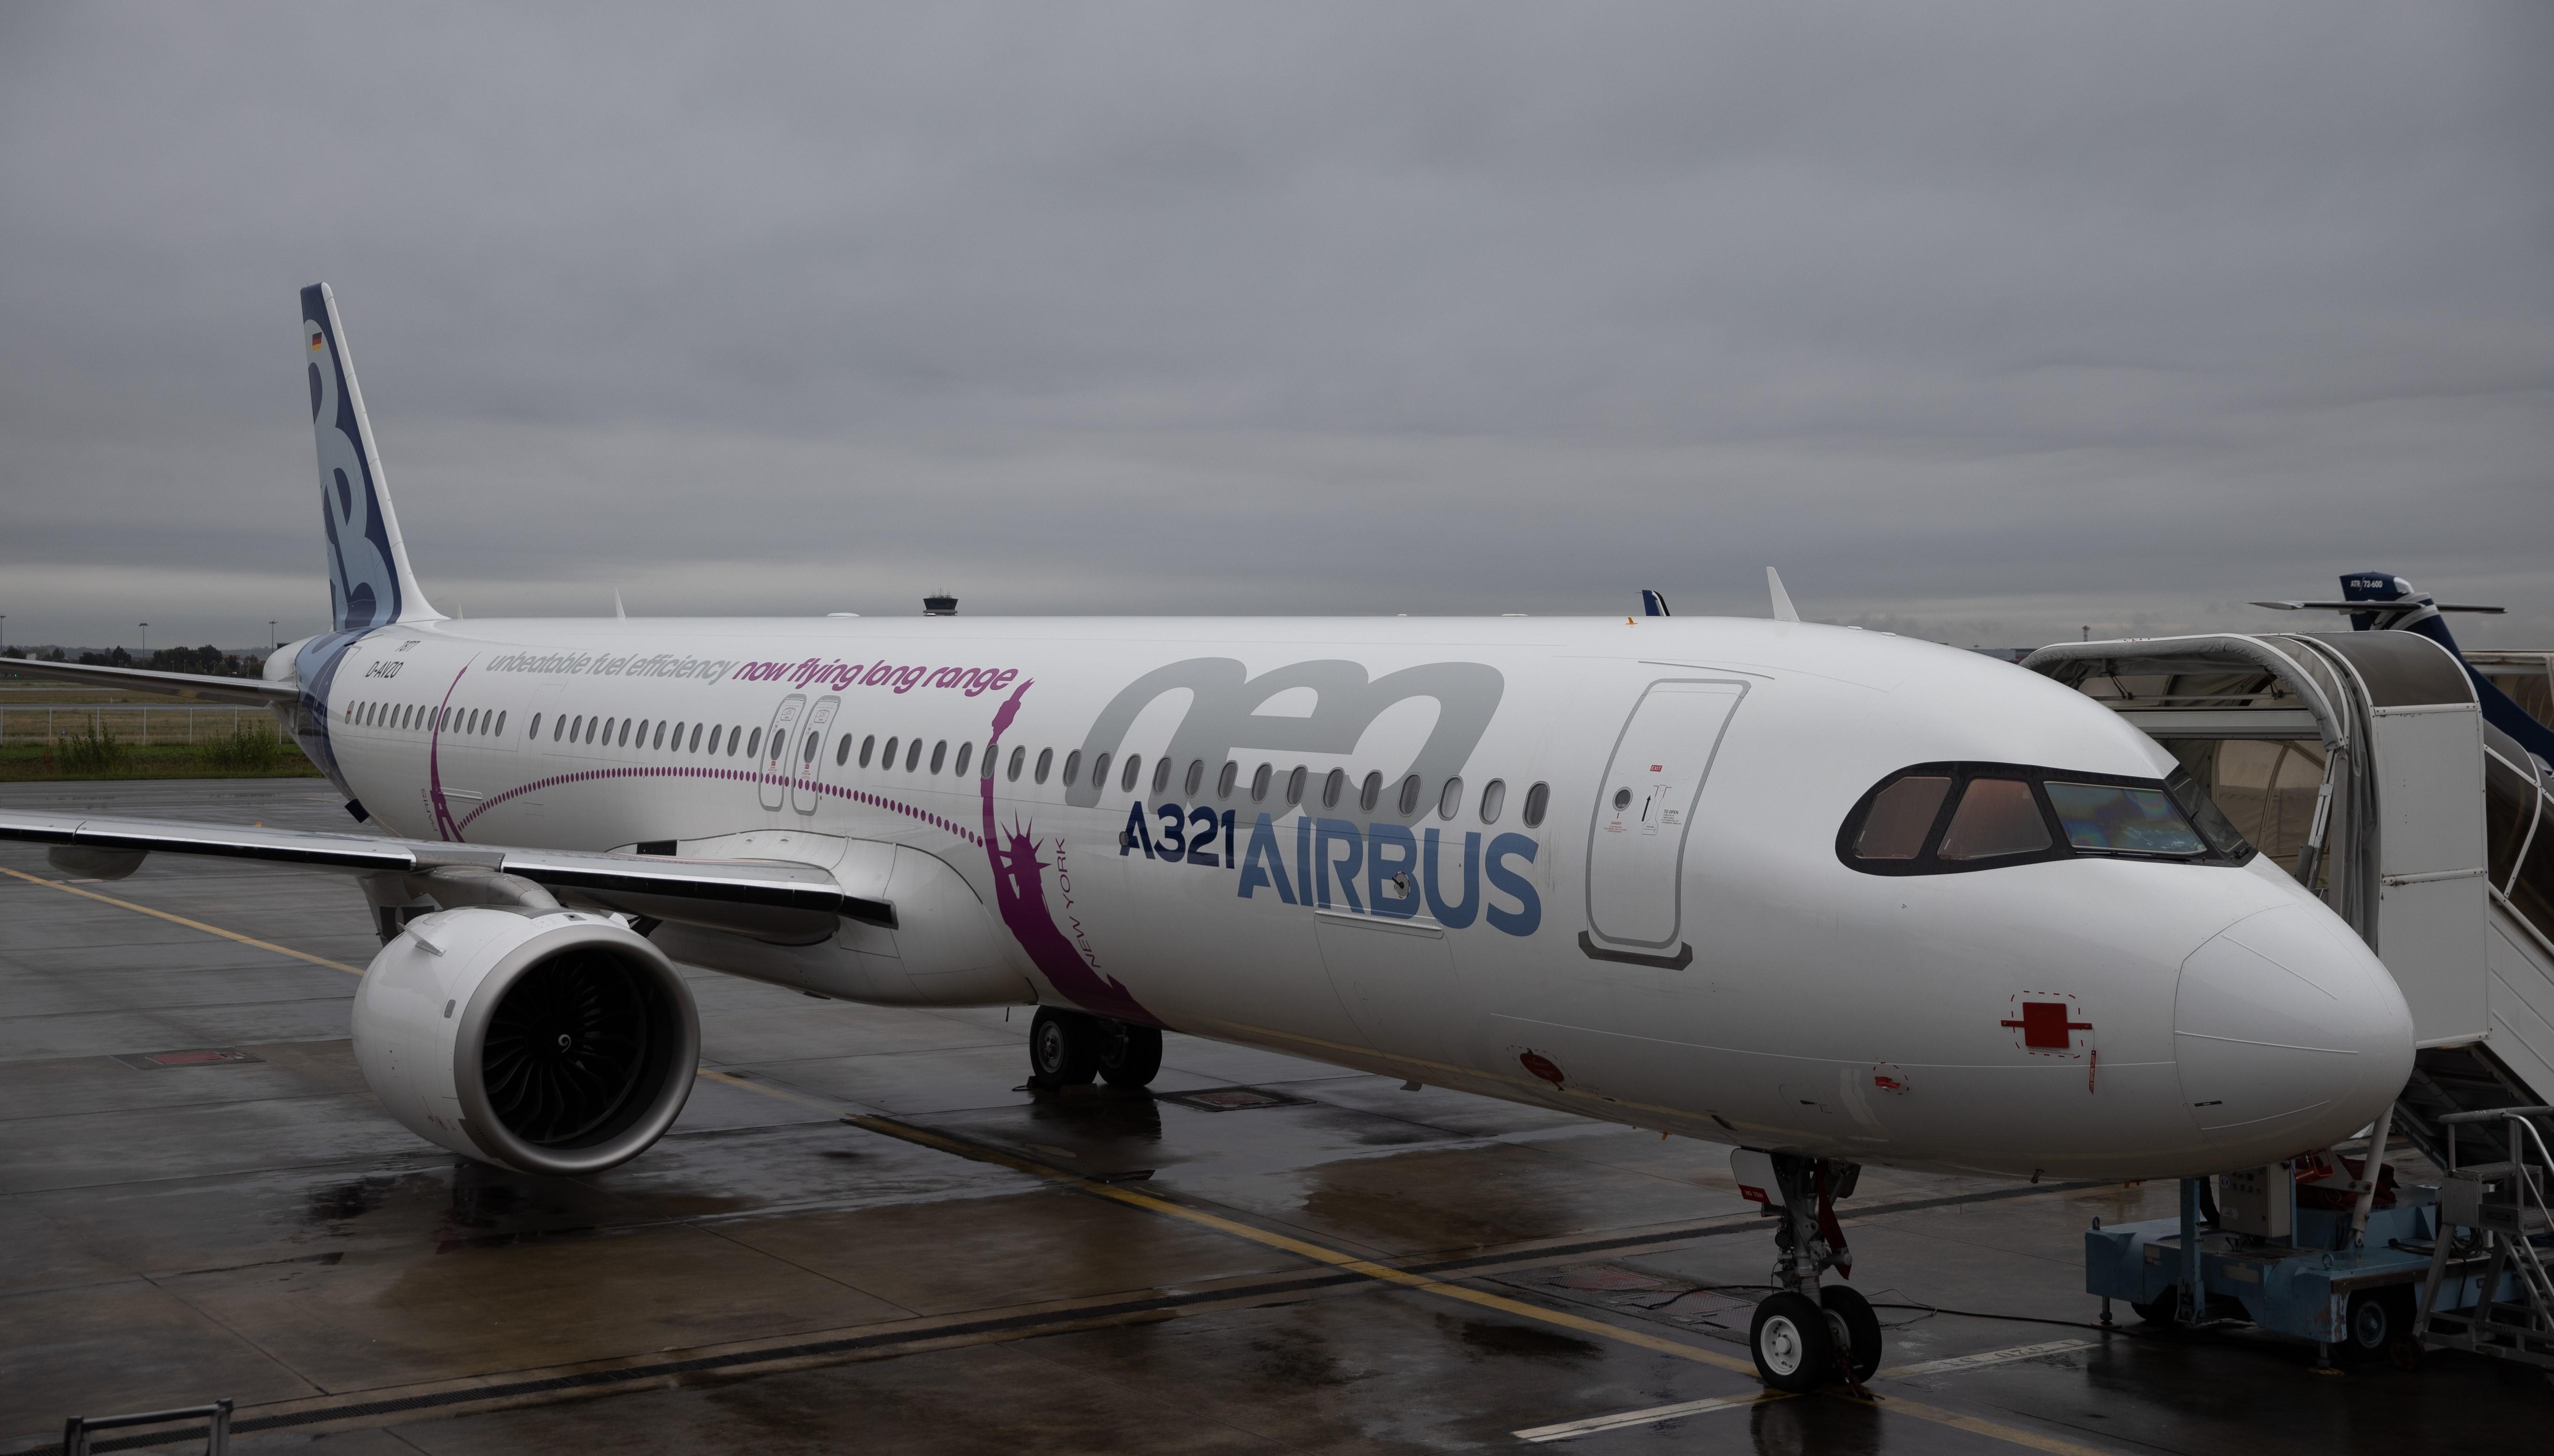 Airbus - Airbus added a new photo.